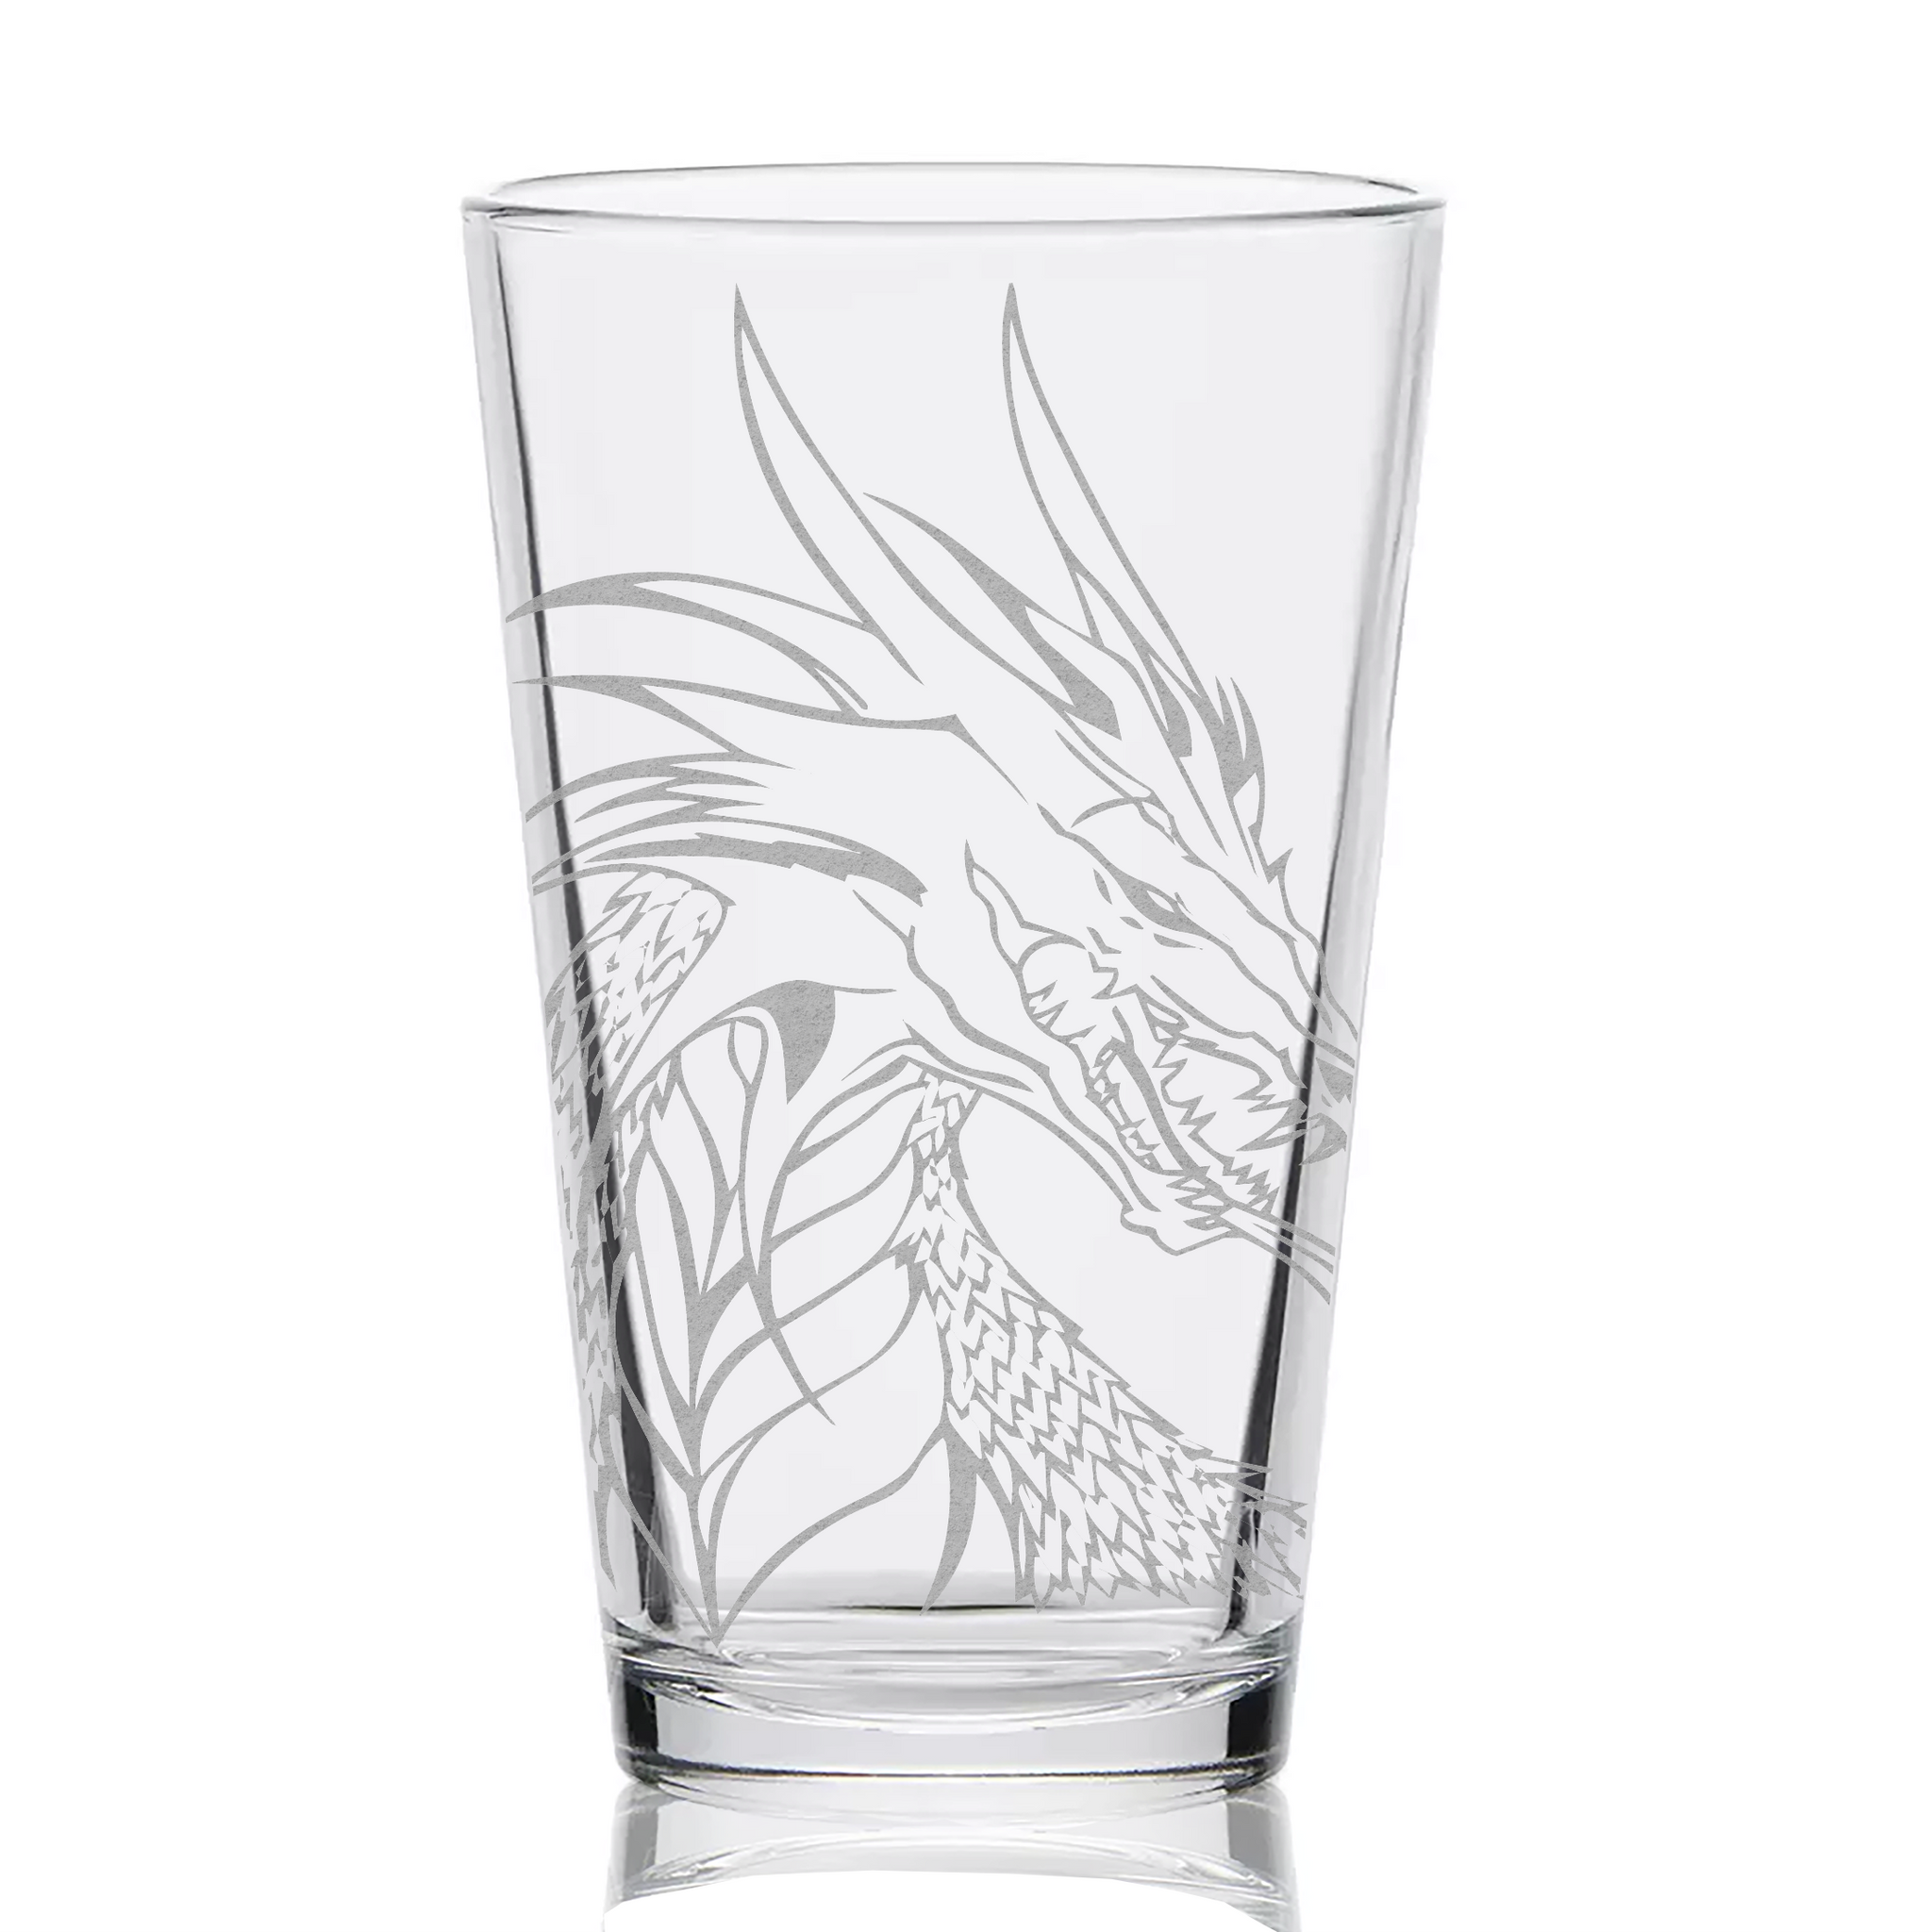 MYTHICAL CREATURES Pint Glasses